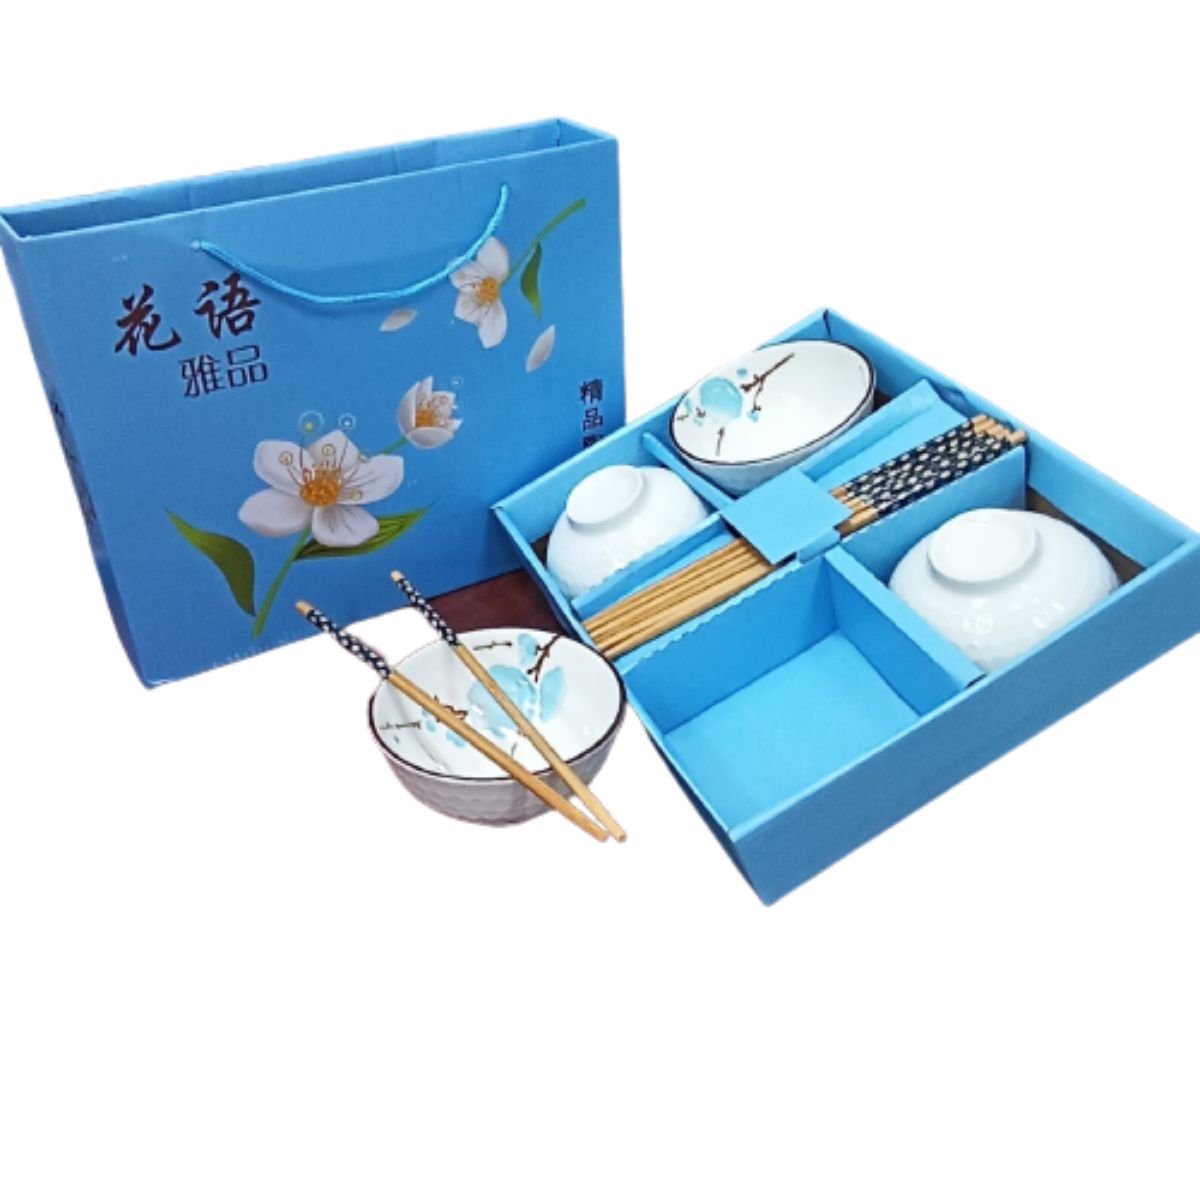 Tableware Set Gift Box with Rice Bowls And Chopsticks - 4Pcs - Blue